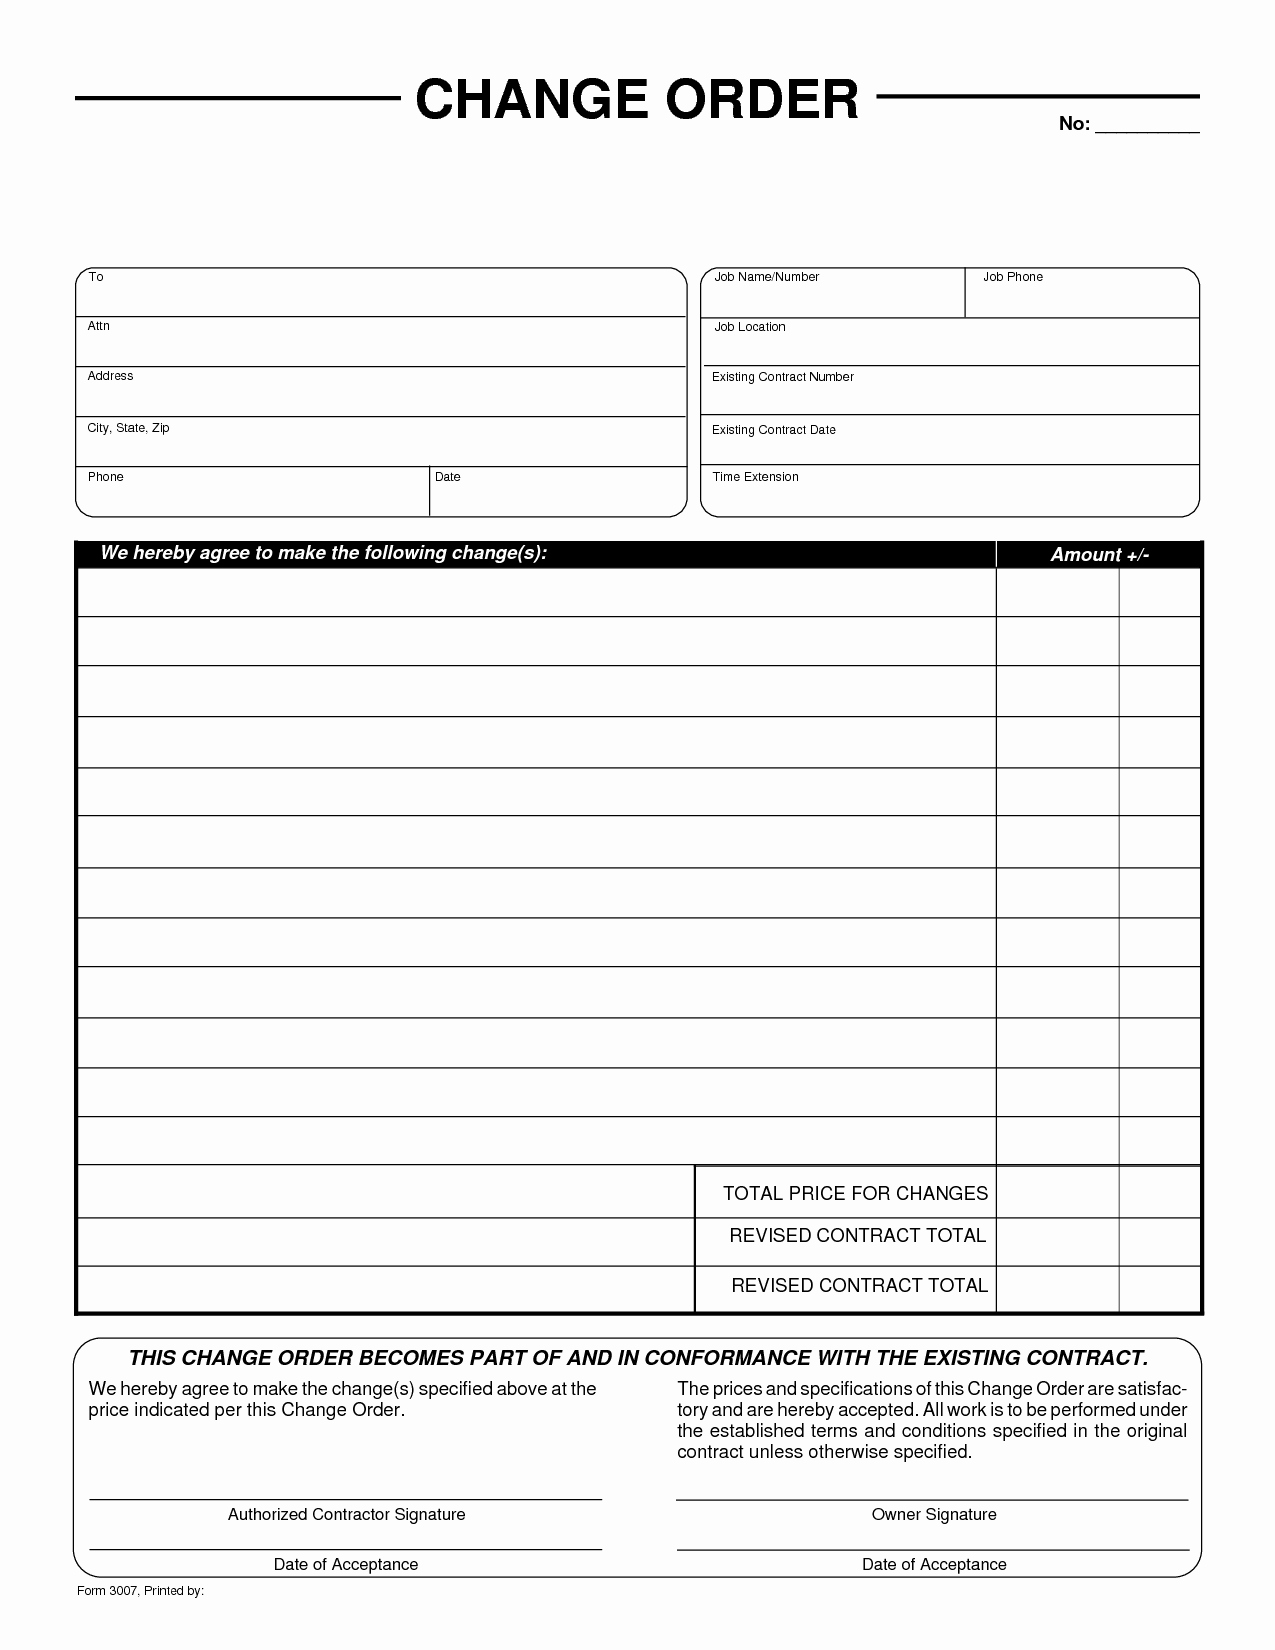 Photography order form Template Free Awesome Change Of order form by Liferetreat Change order form